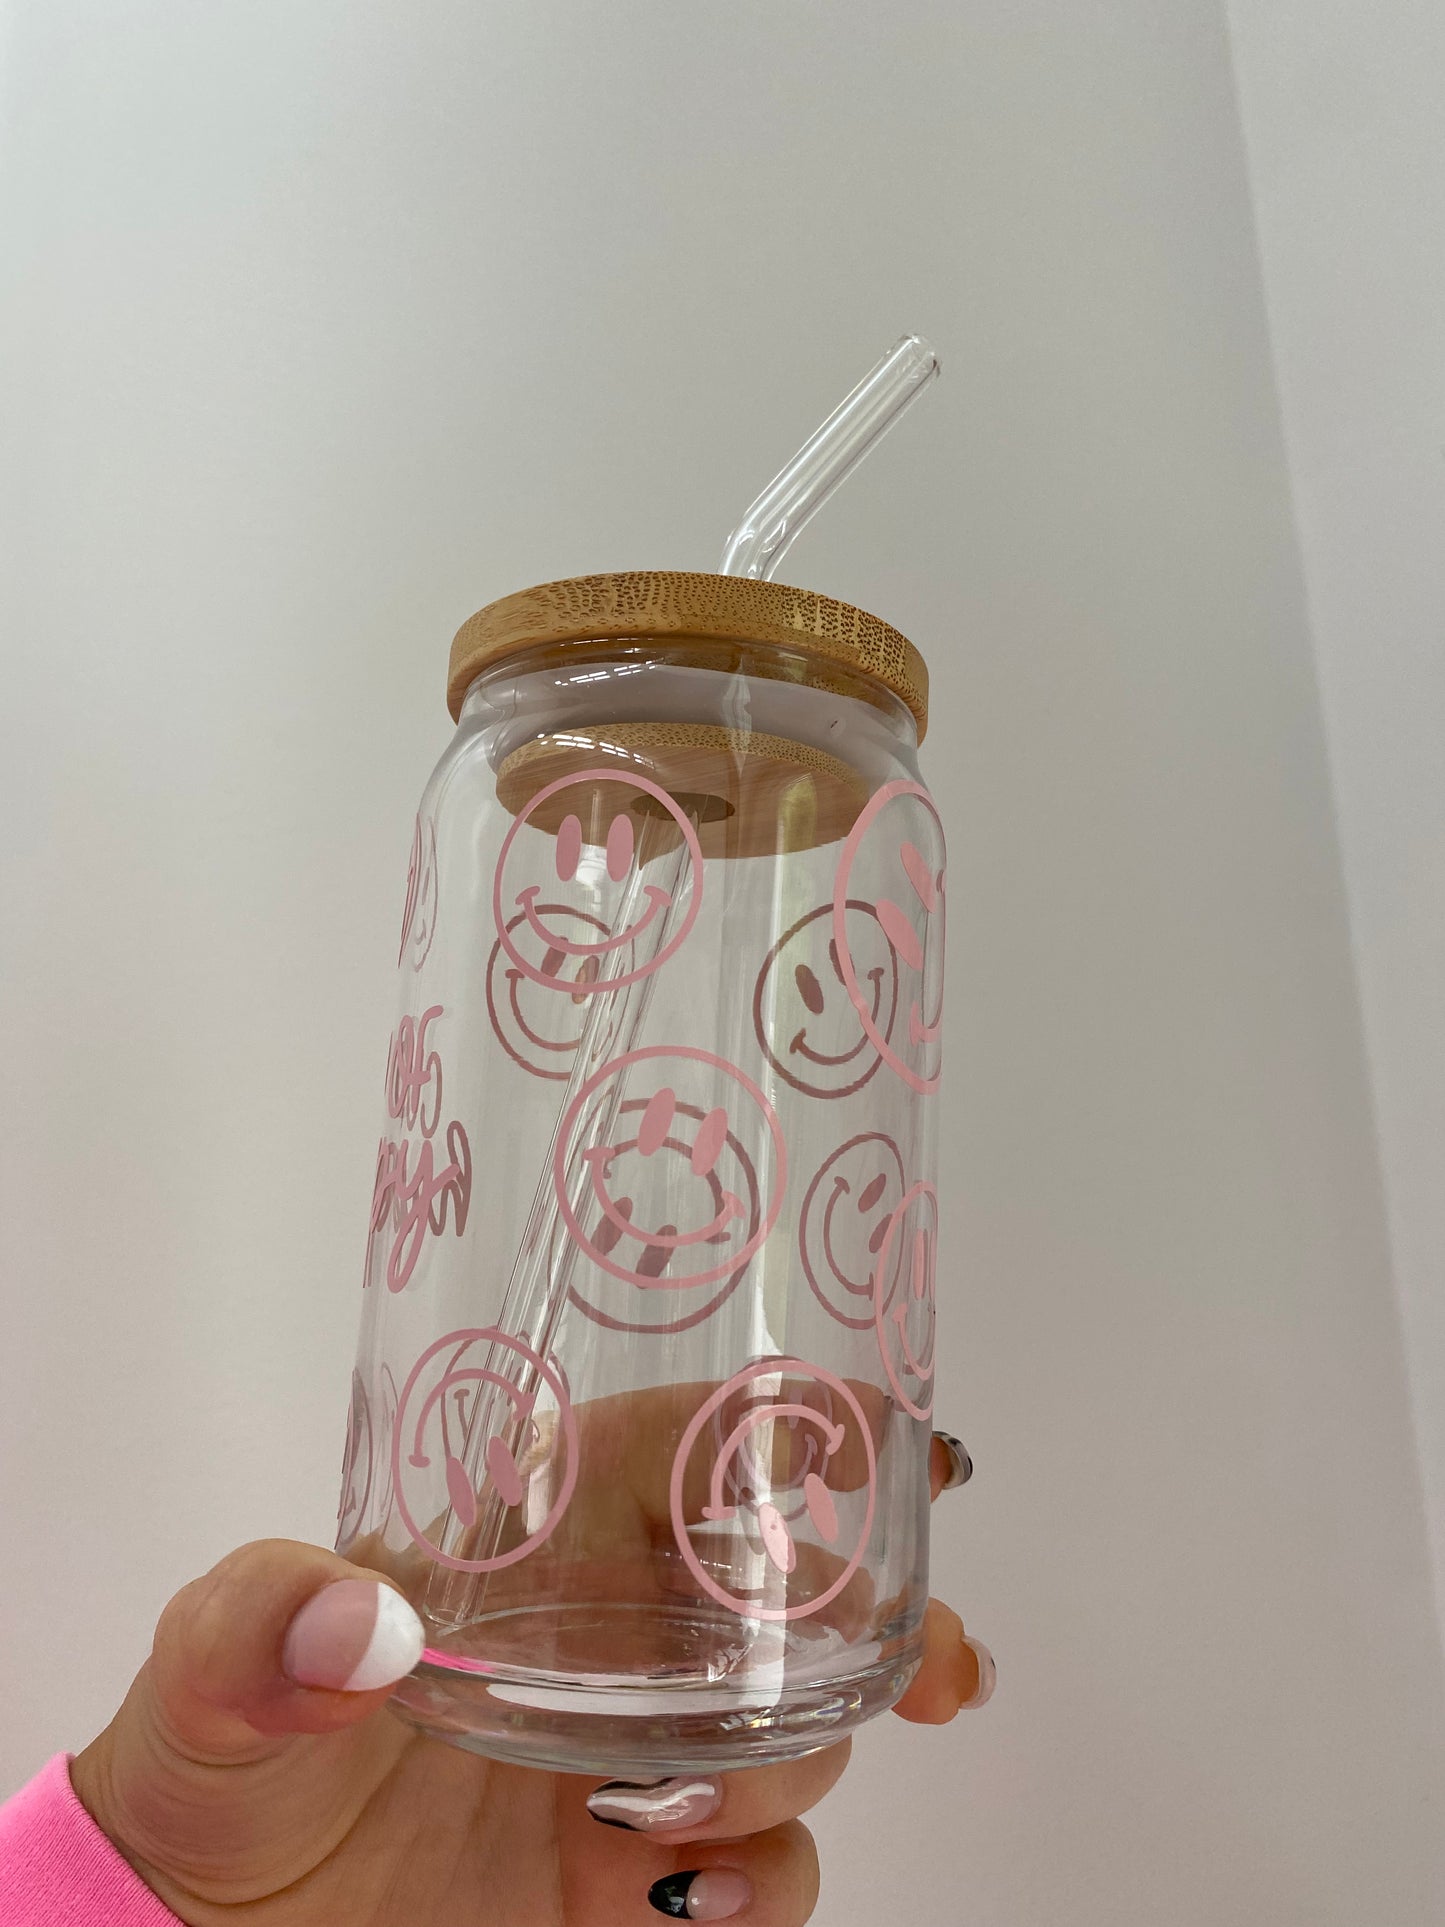 Pink Cup of Happy Smiley Iced Coffee Glass